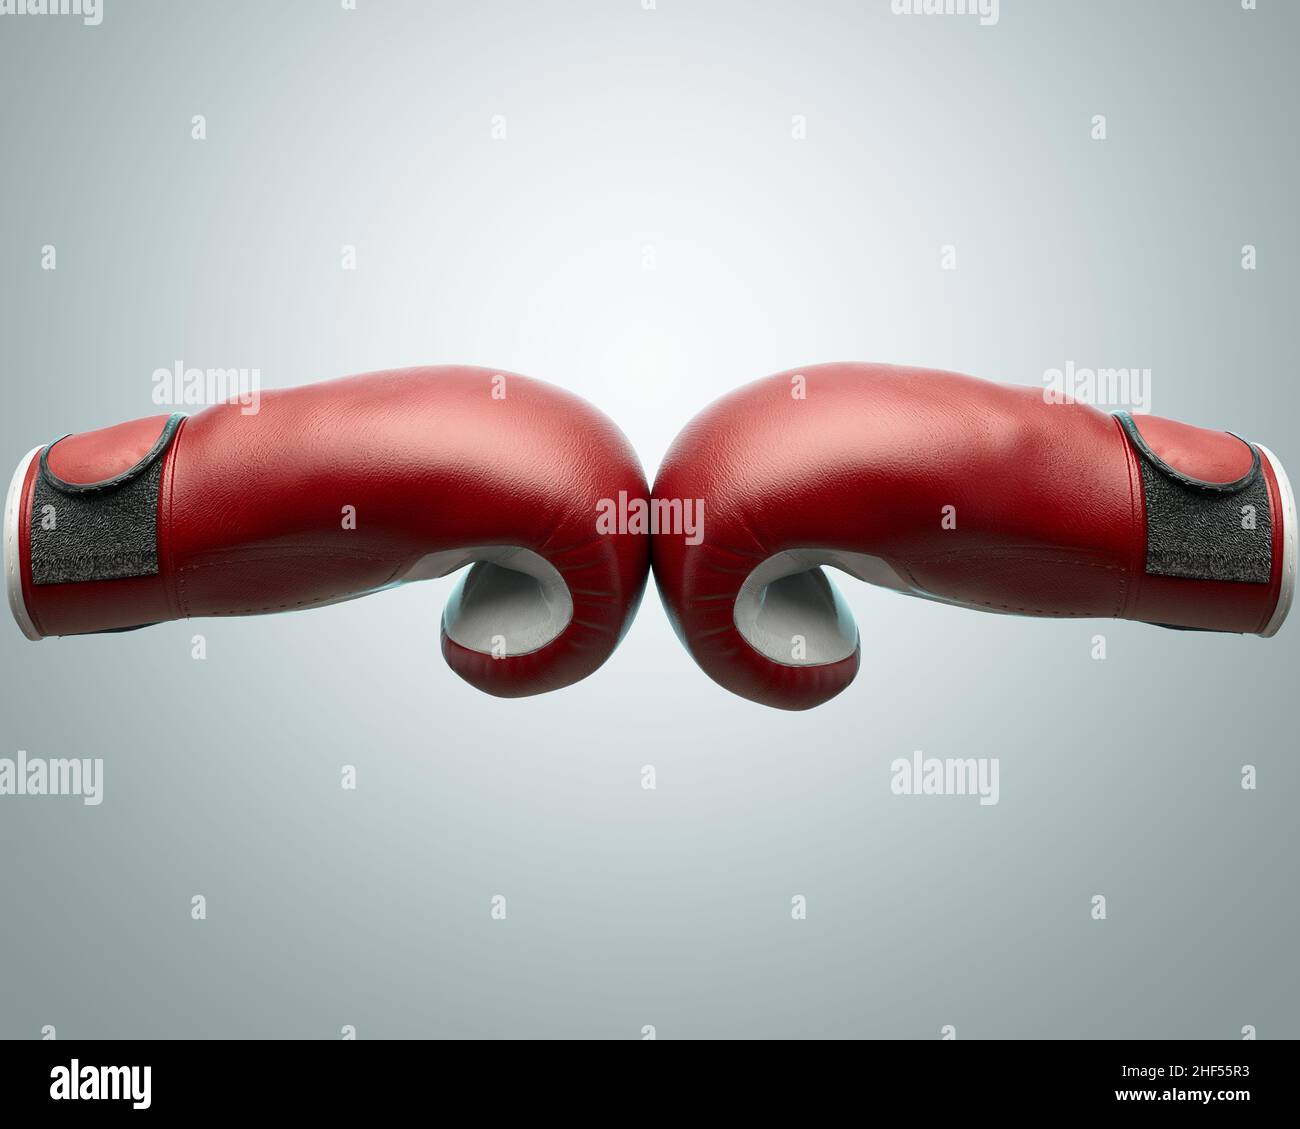 A concept showing two red and white opposing boxing gloves touching in the middle of an isolated background - 3D renders Stock Photo